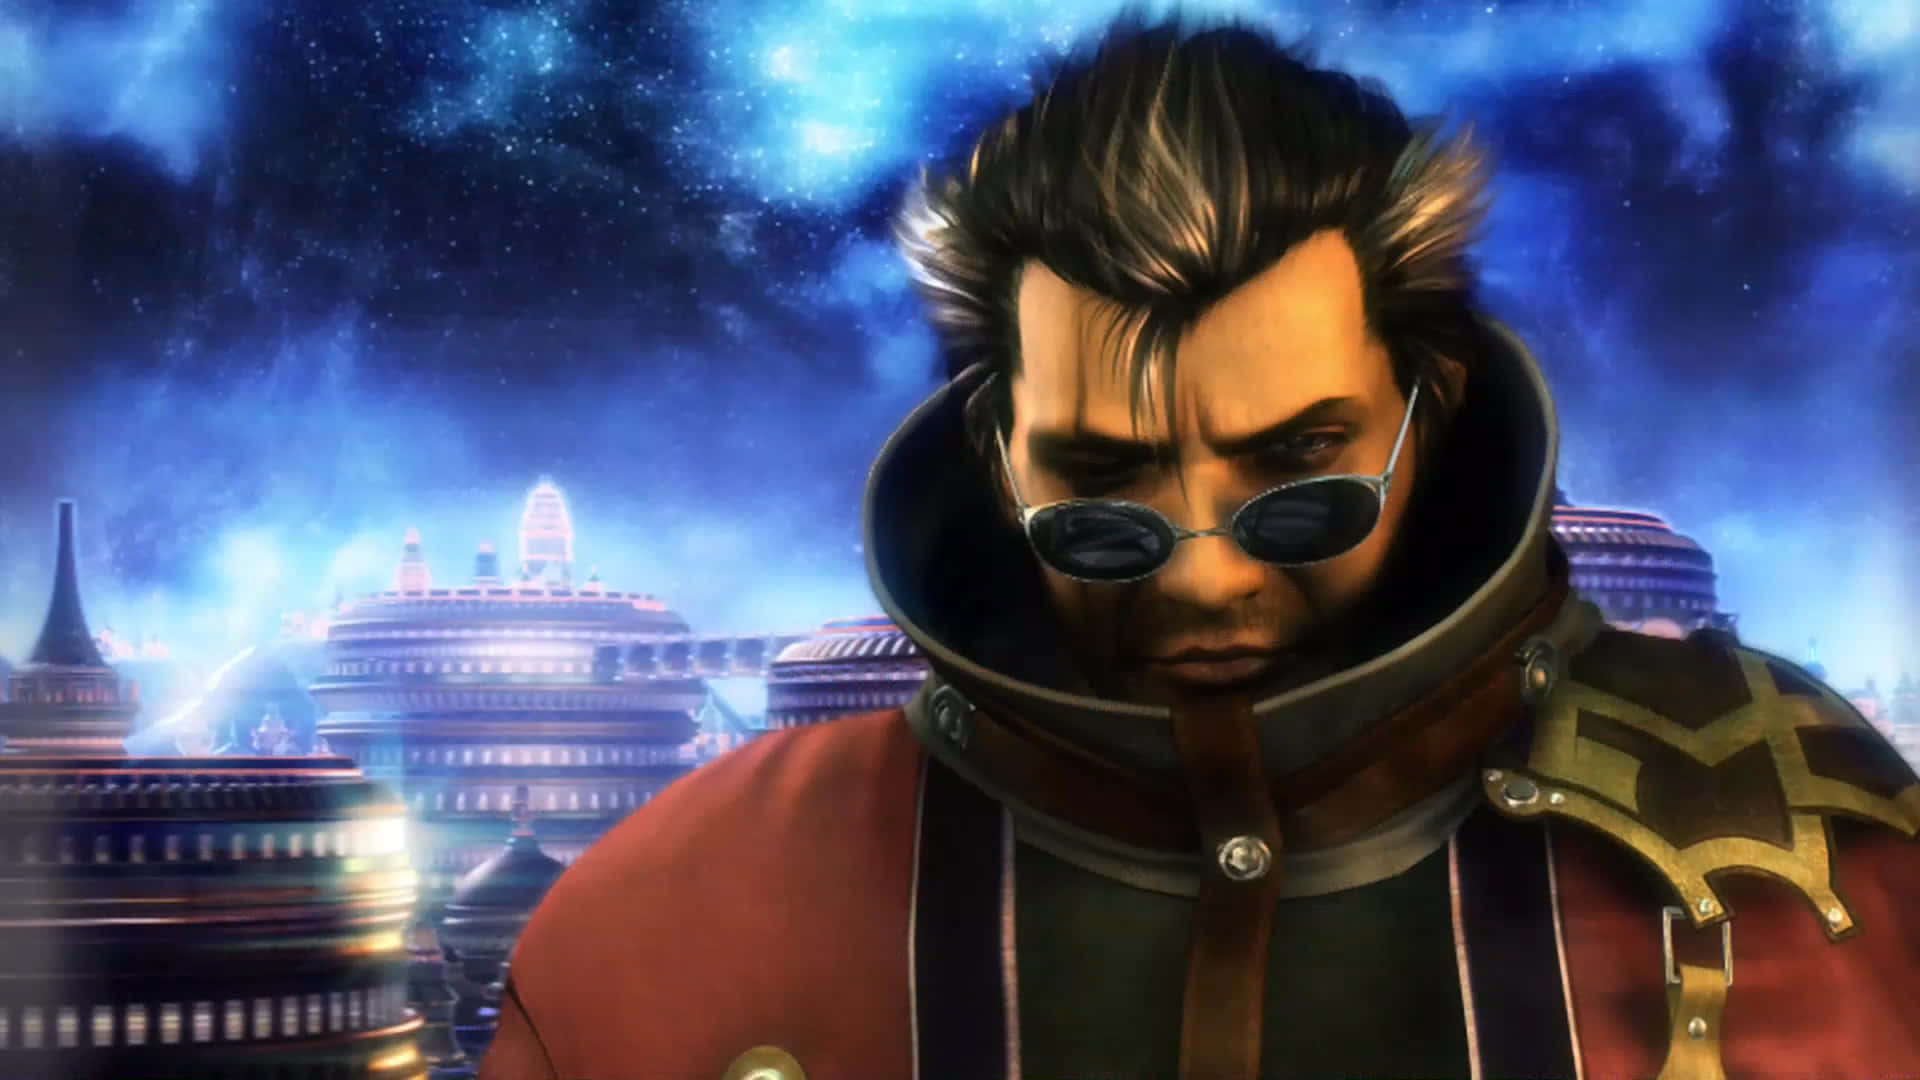 Warrior Of The Final Fantasy Game, Auron In Poised Action Wallpaper